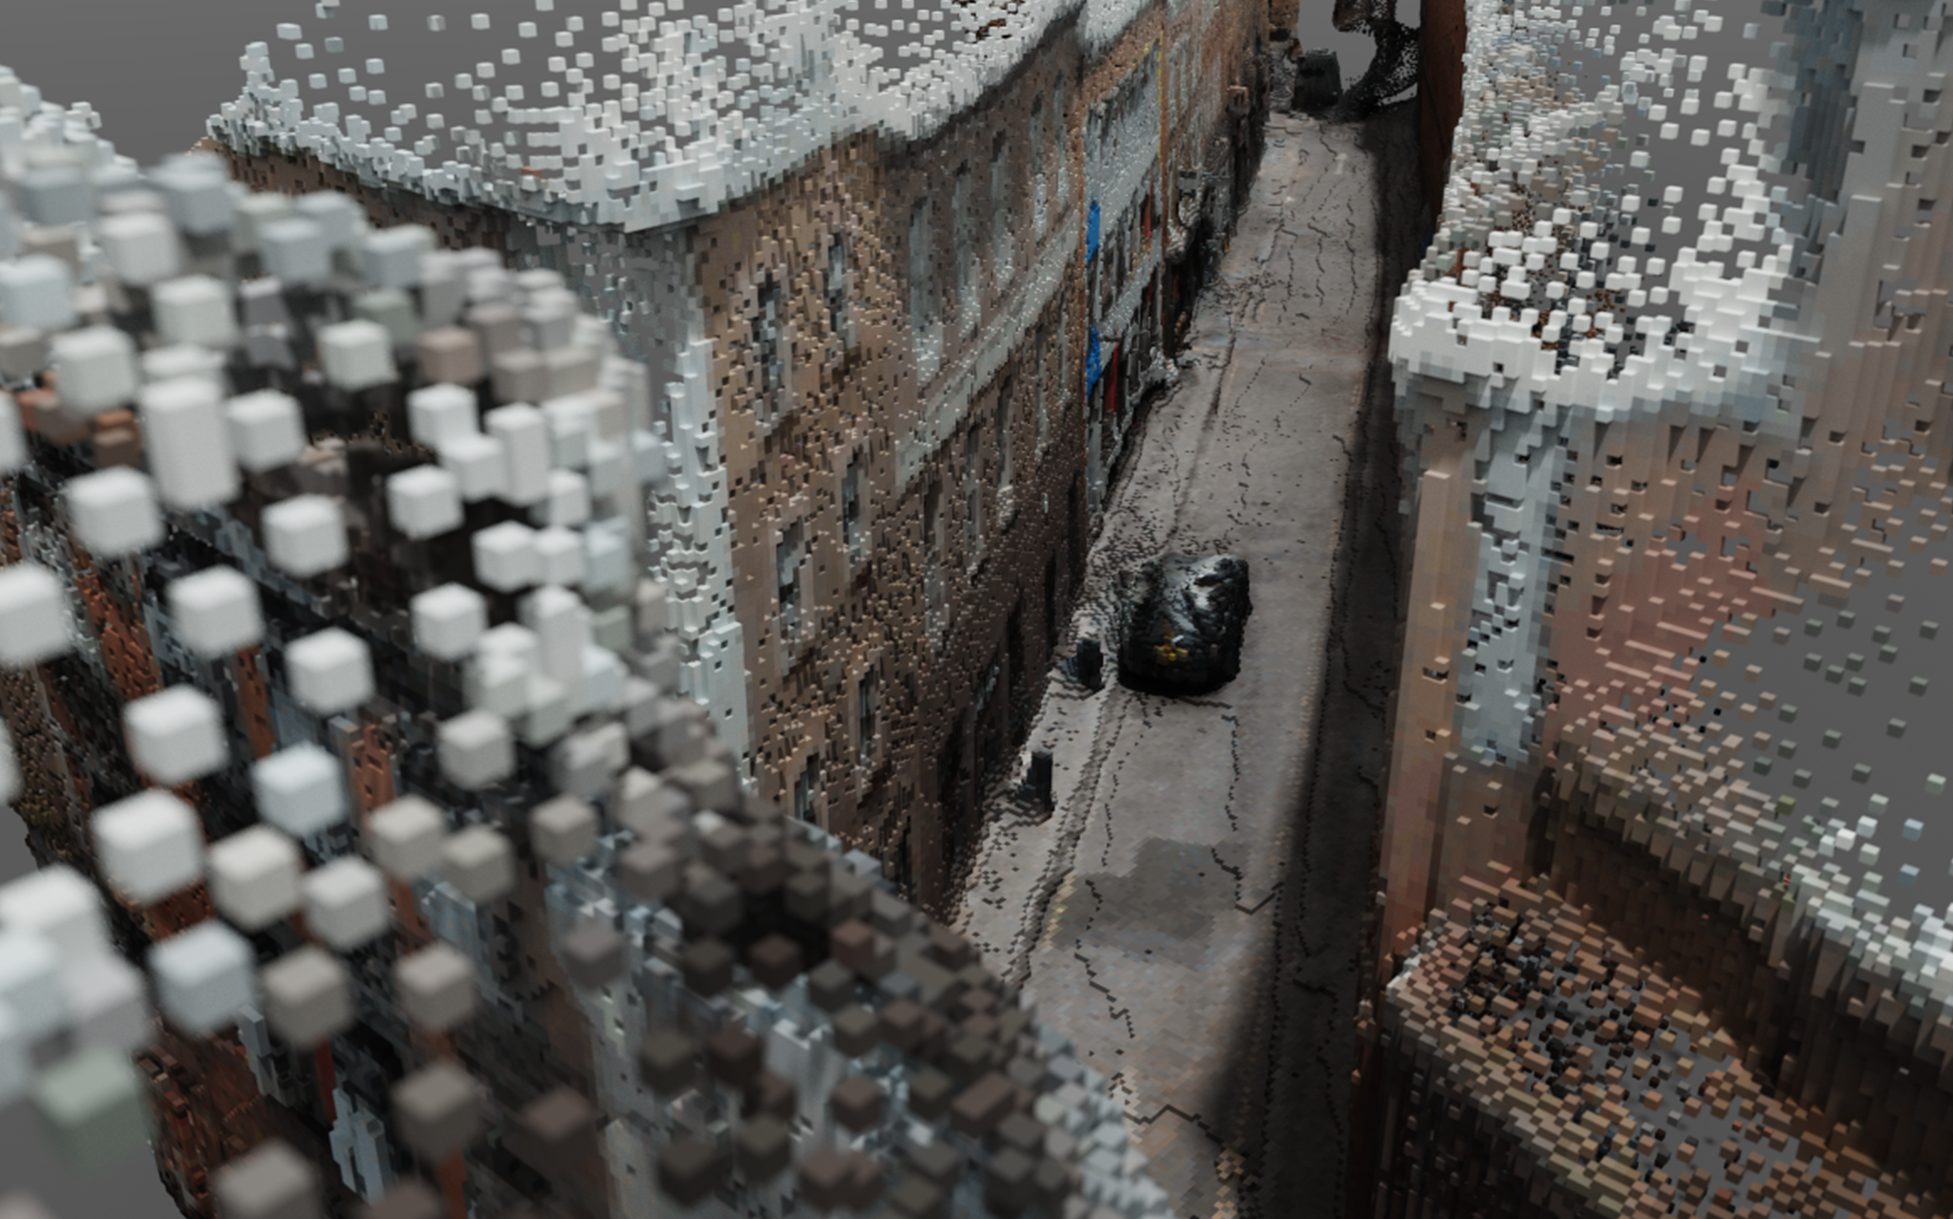 Digital realisation of a city street view looking down from just above the roofs of the surrounding buildings. A single car is visible on the street. The image has been broken down into cubes, like 3-dimensional pixels.